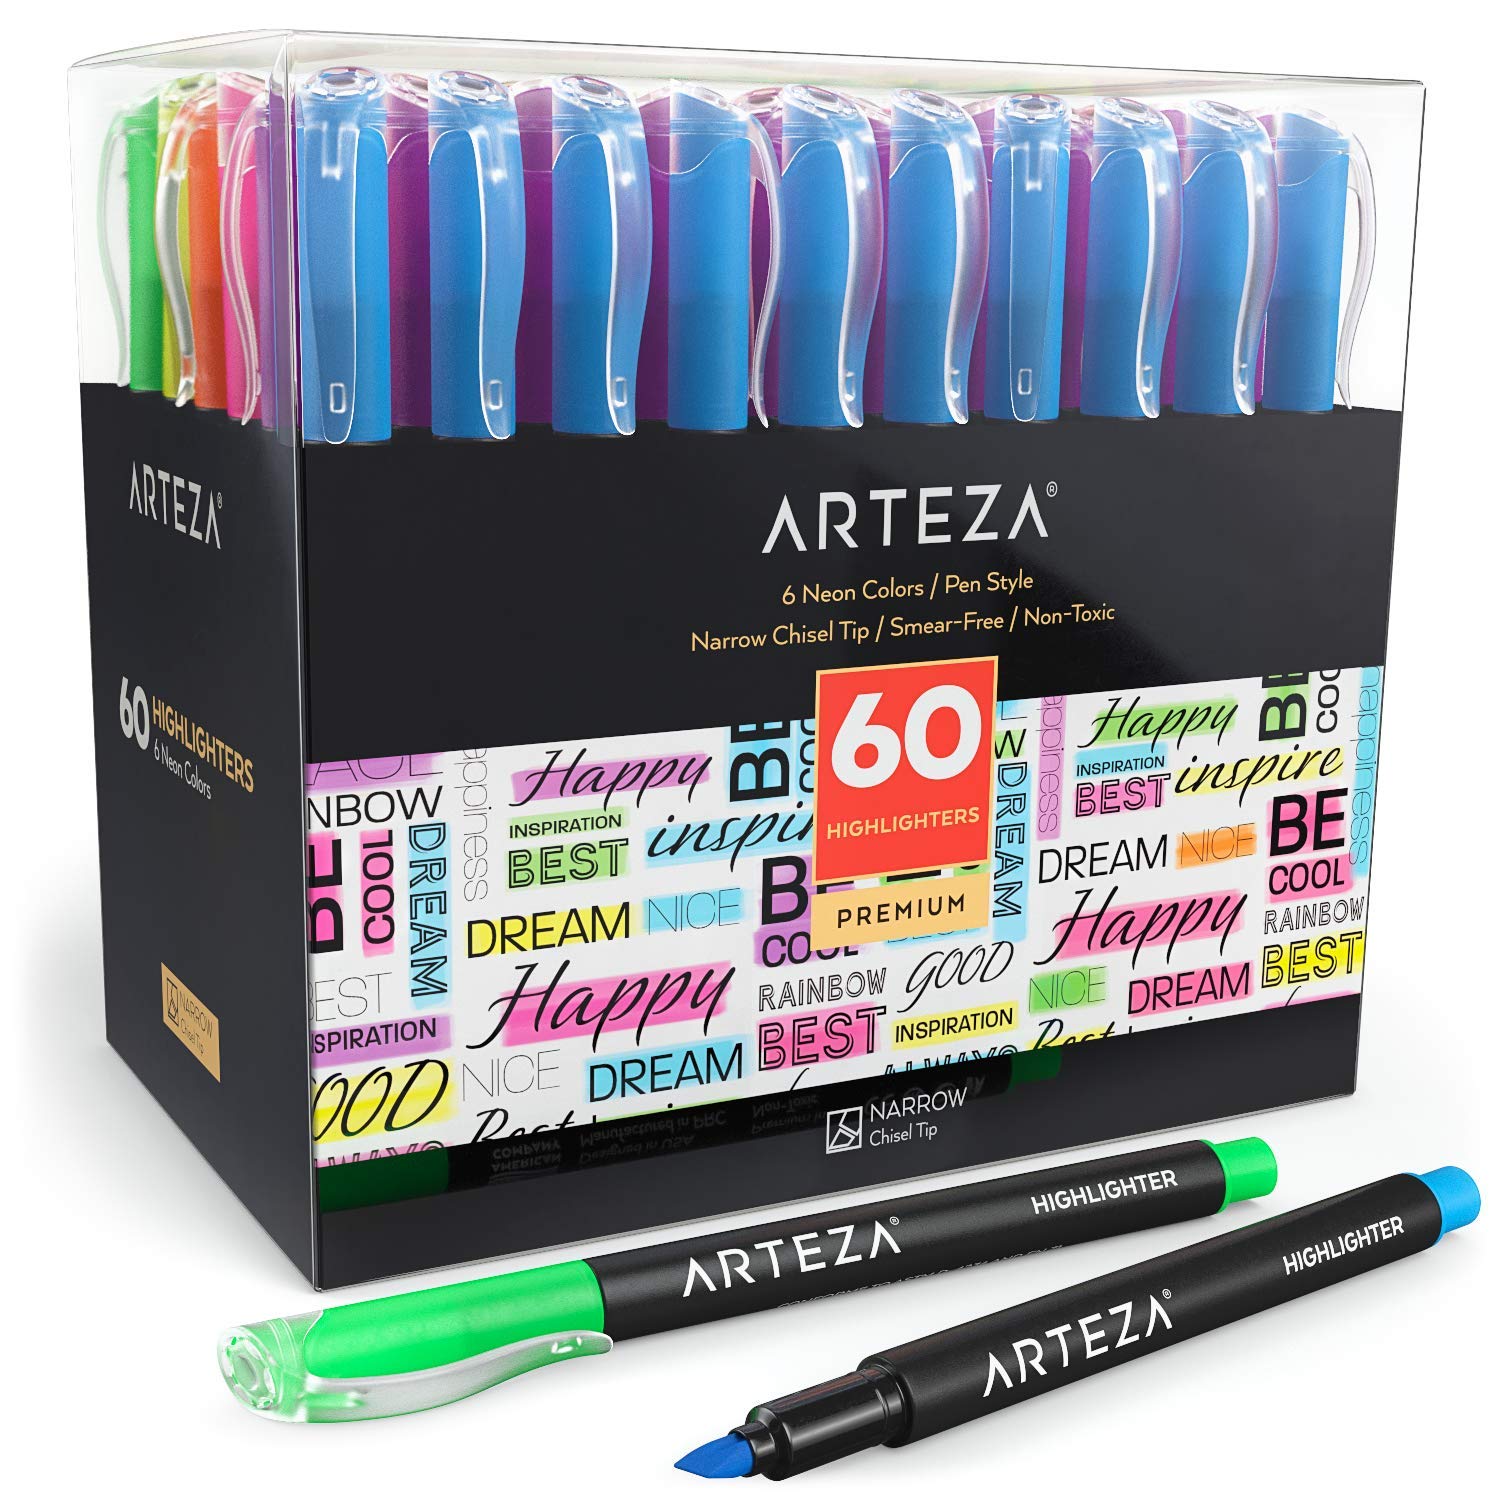 Arteza Highlighters, 6 Assorted Colors, Narrow Chisel Tip - Set of 60